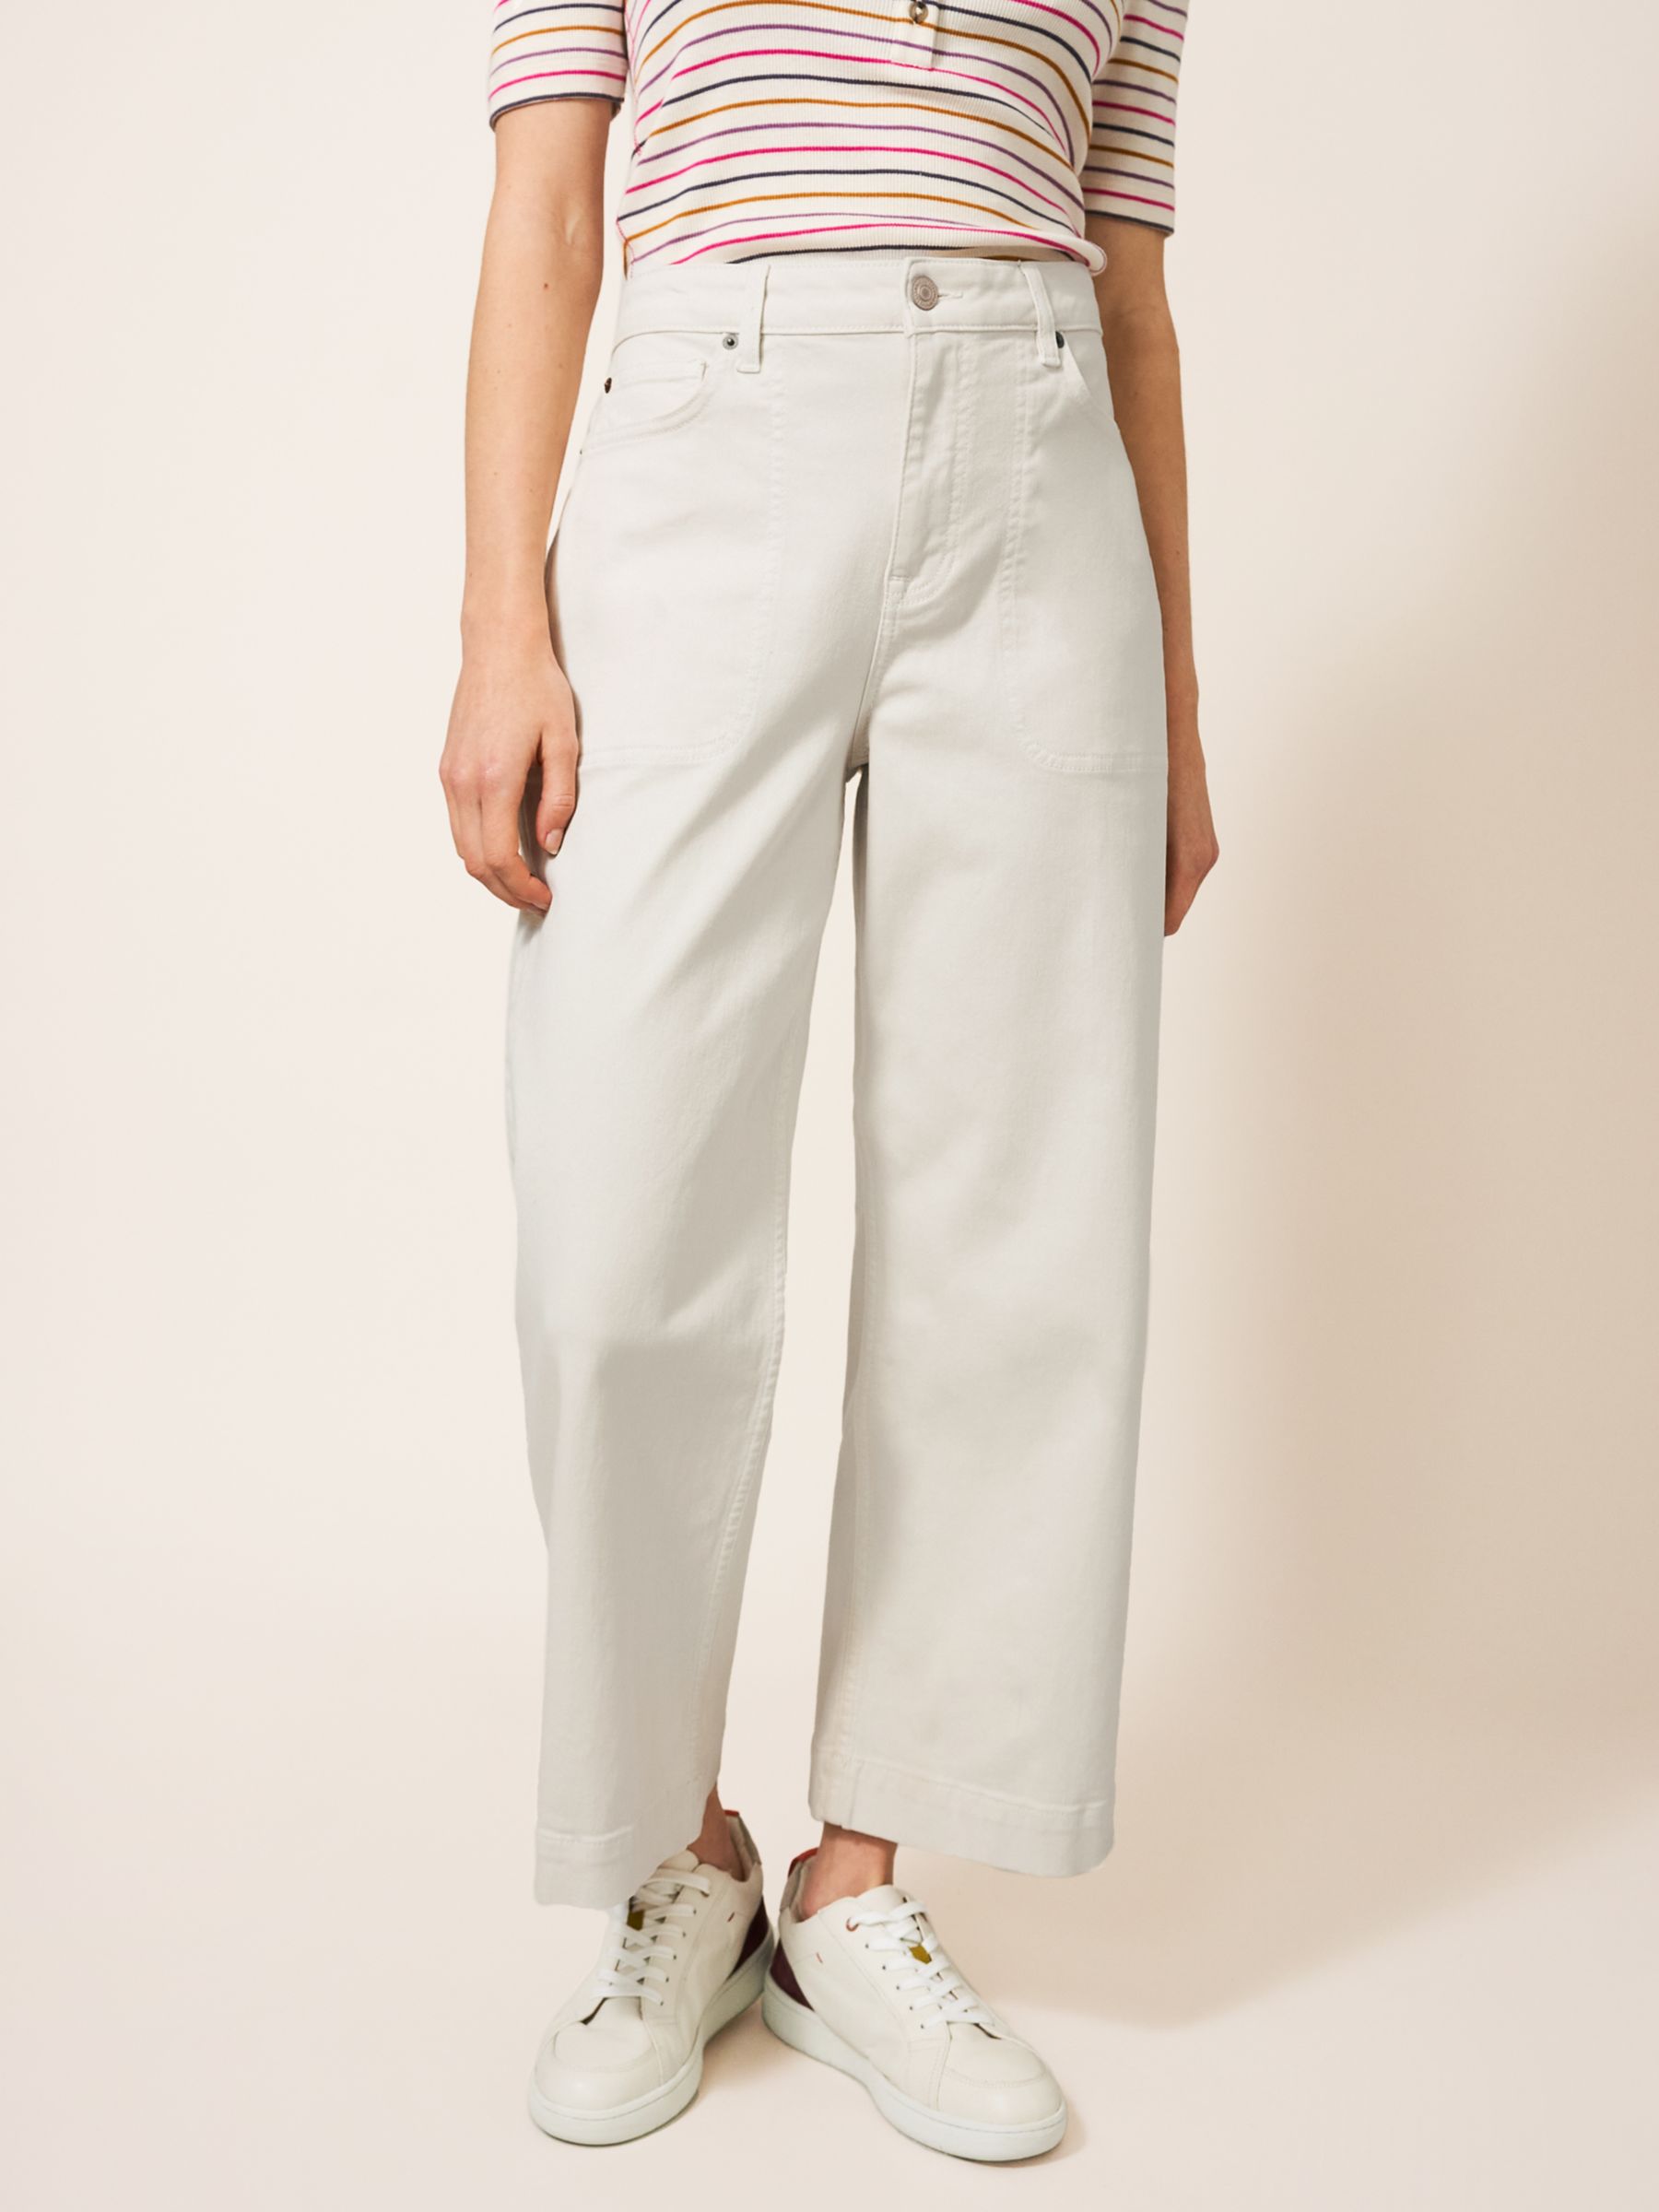 Buy White Stuff Plain Wide Leg Cropped Jeans Online at johnlewis.com